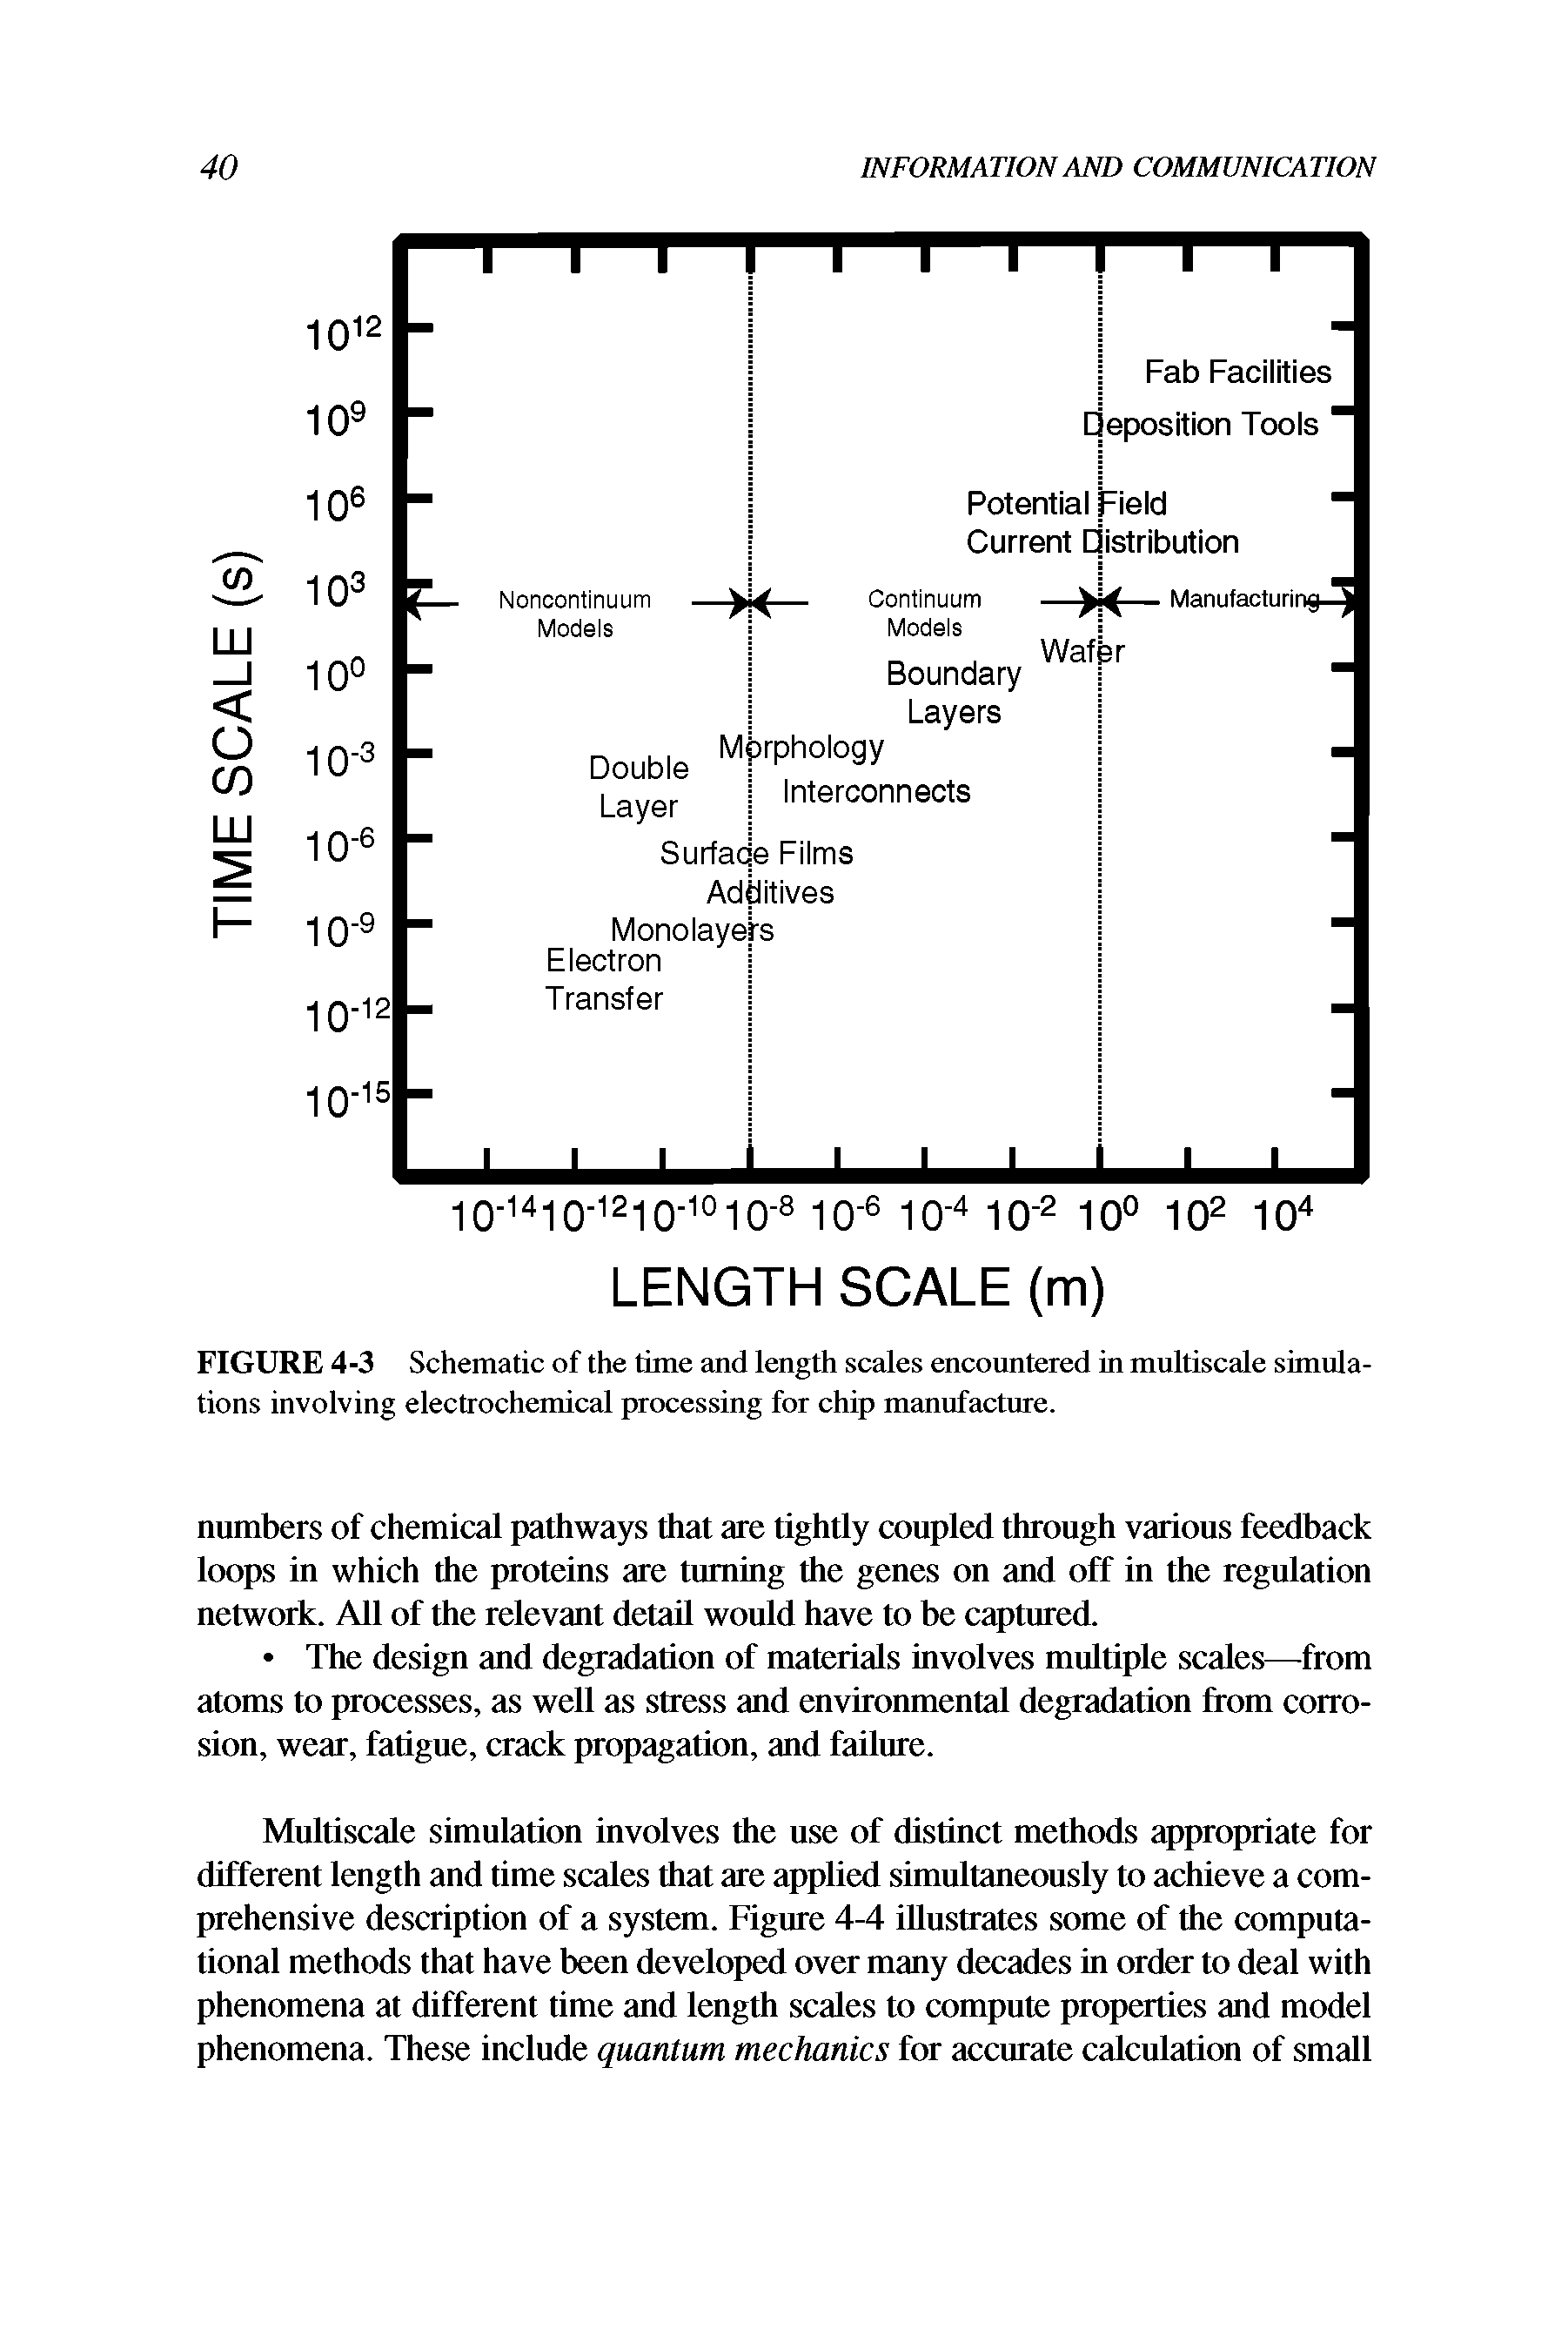 Schematic of the time and length scales encountered in multiscale simula-electrochemical processing for chip manufacture.